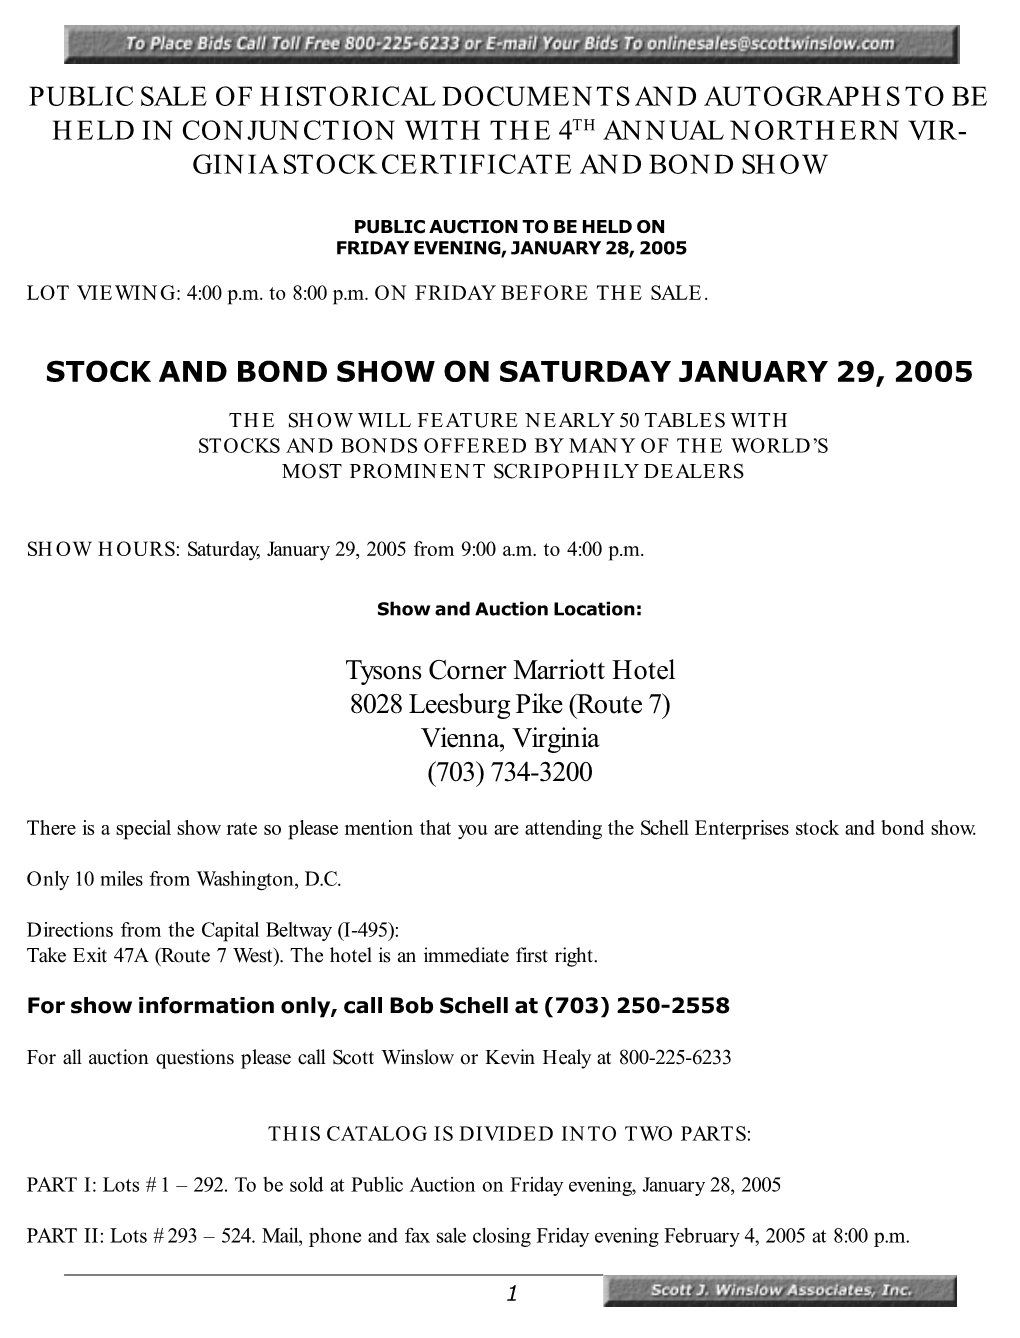 Ginia Stock Certificate and Bond Show